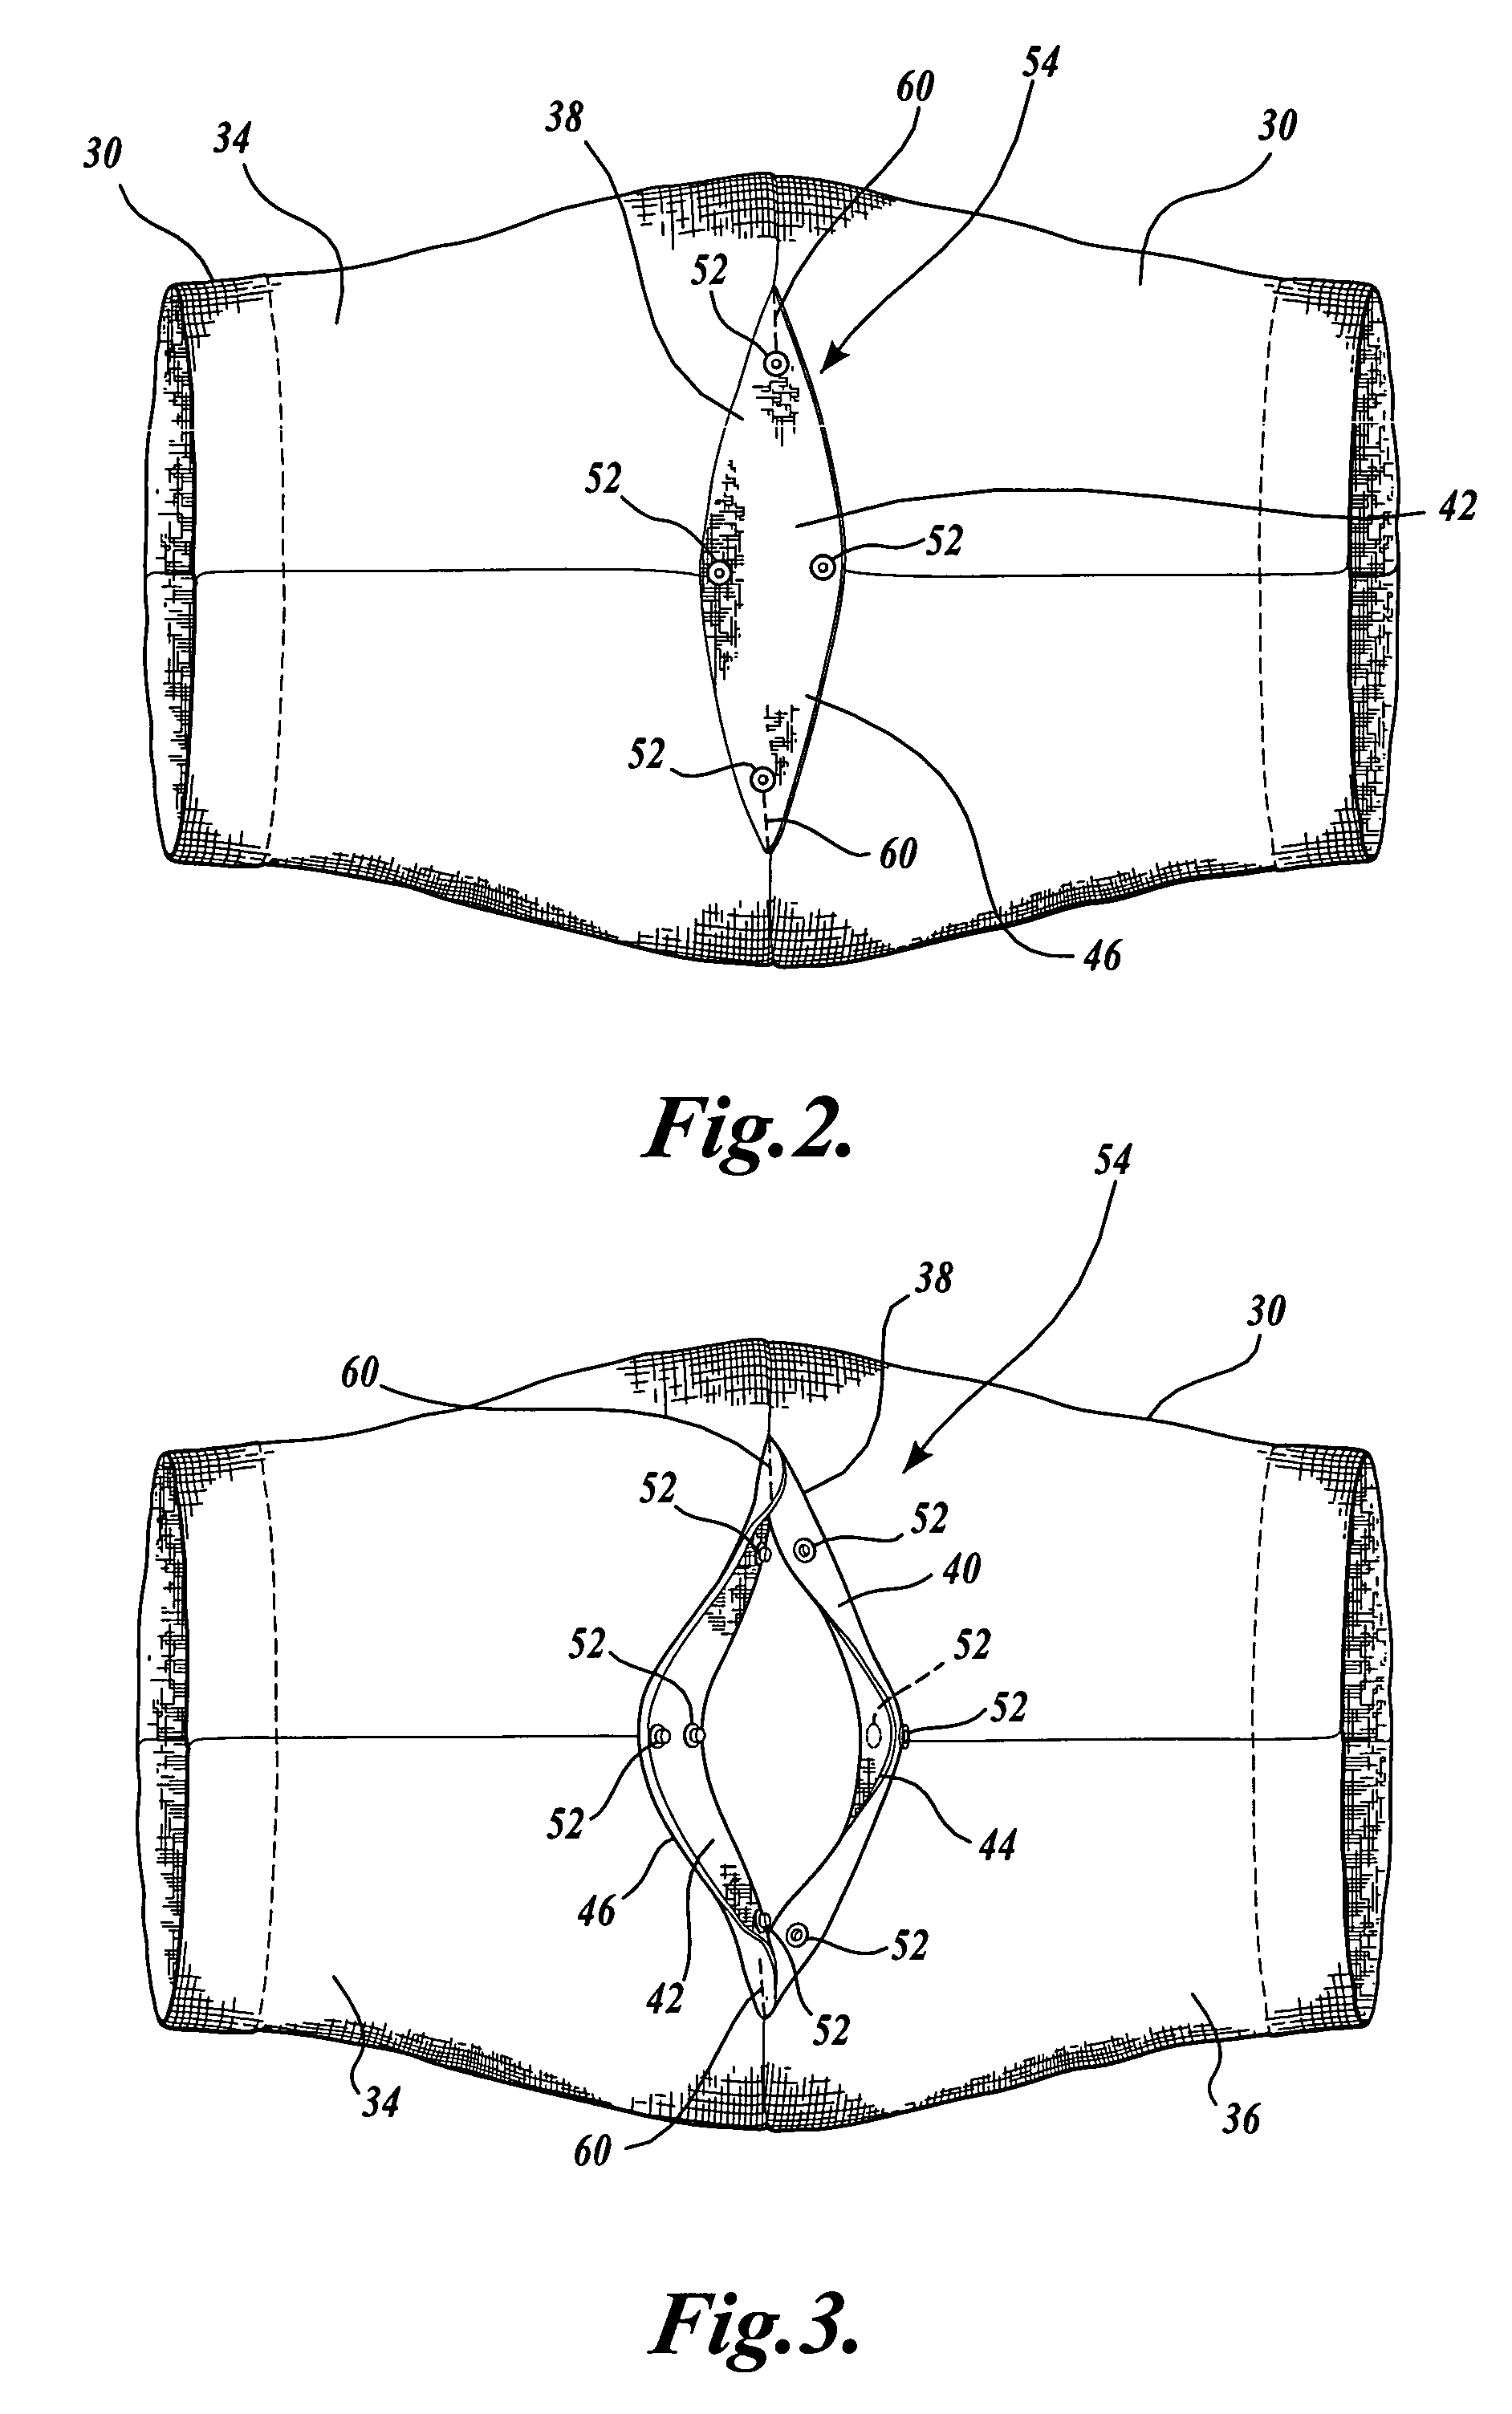 Article of clothing with a crotch portion positionable between open and closed positions